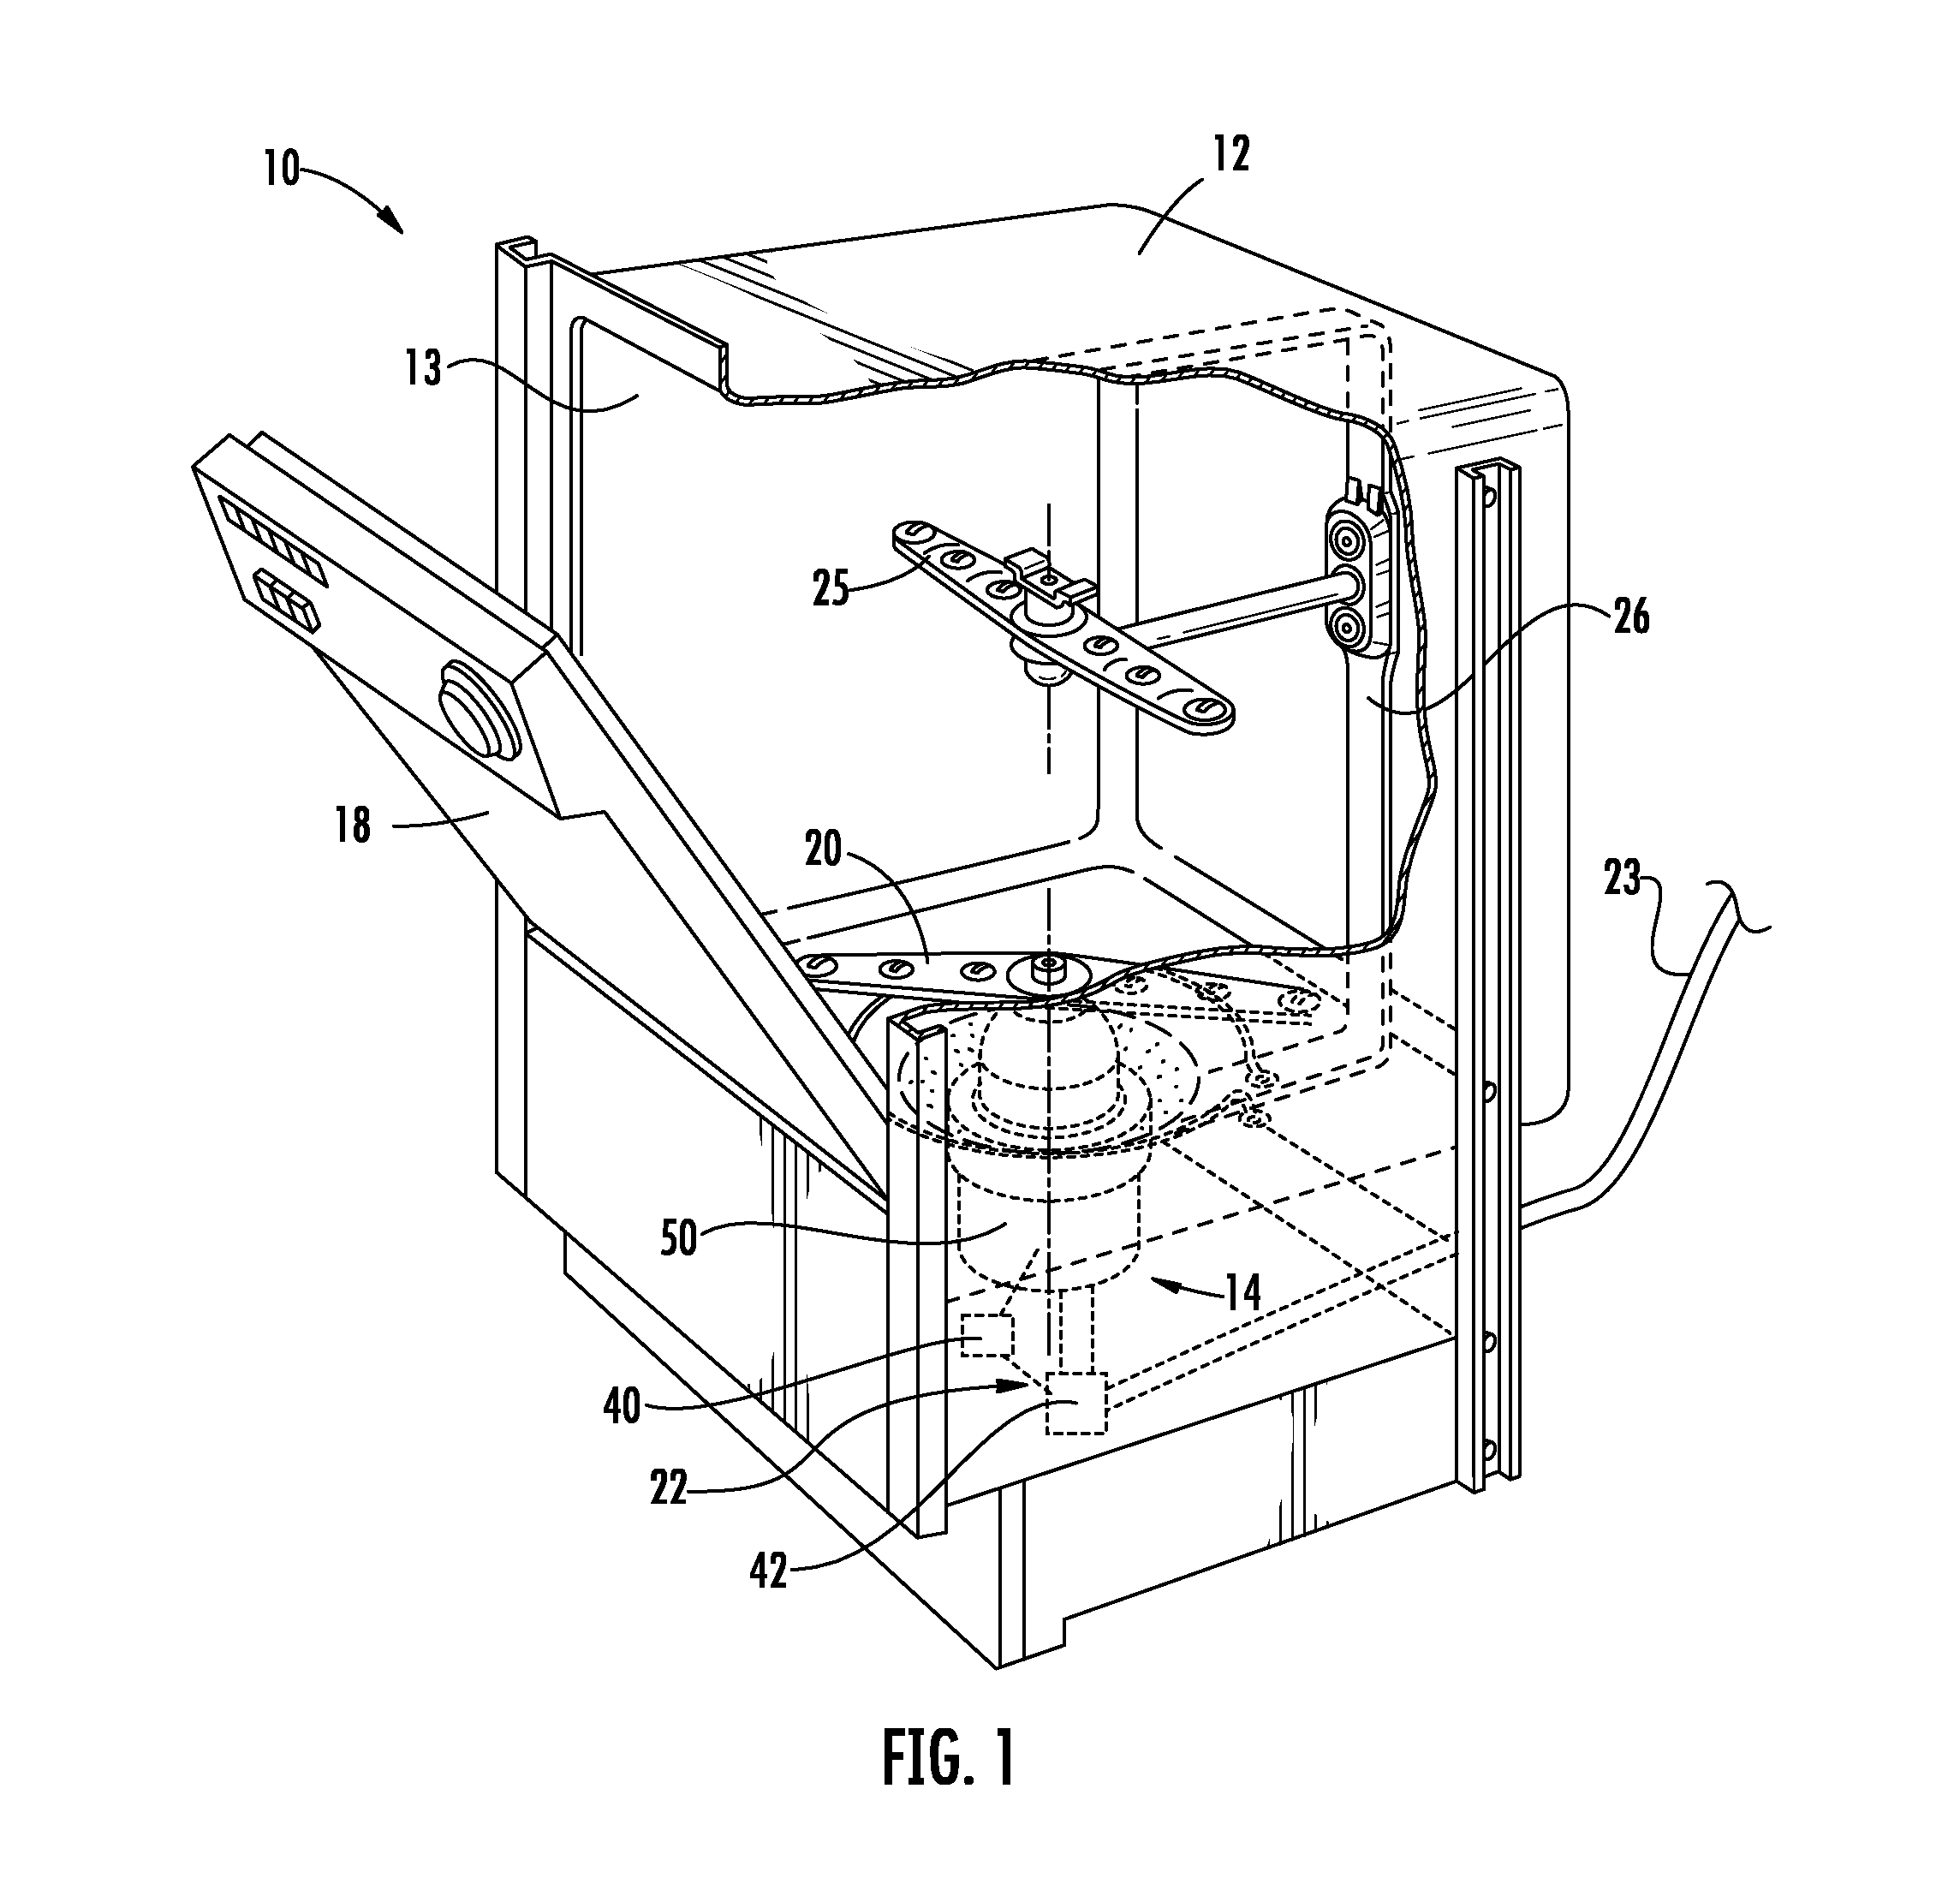 Method and system for detecting and removing a clogging condition of a filter in a dishwasher